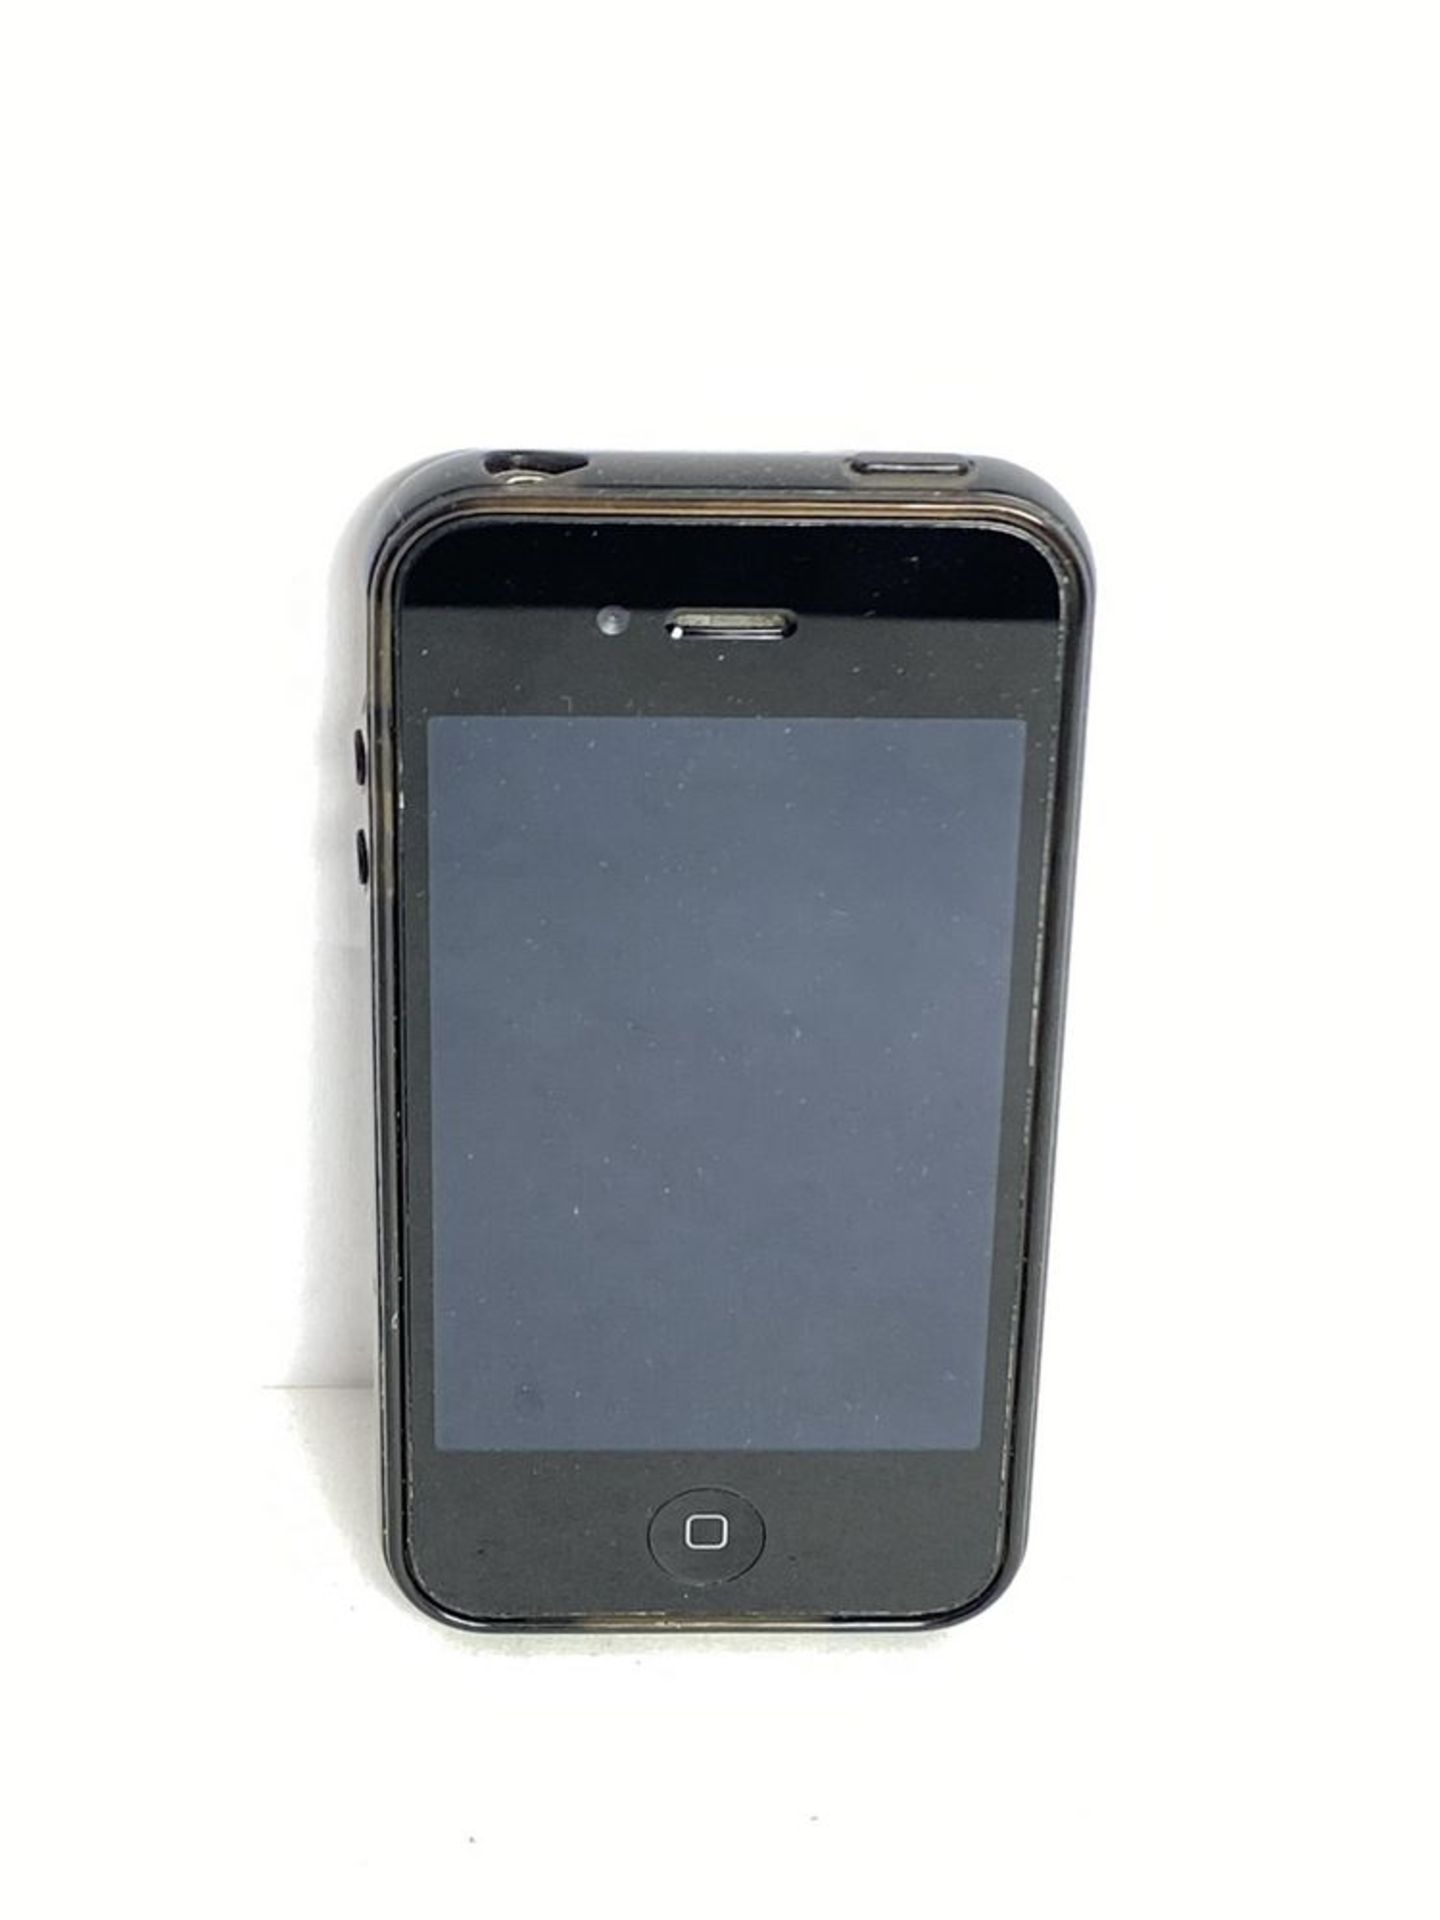 Apple iPhone 4S Model A1387, Black, In Case - Image 2 of 3